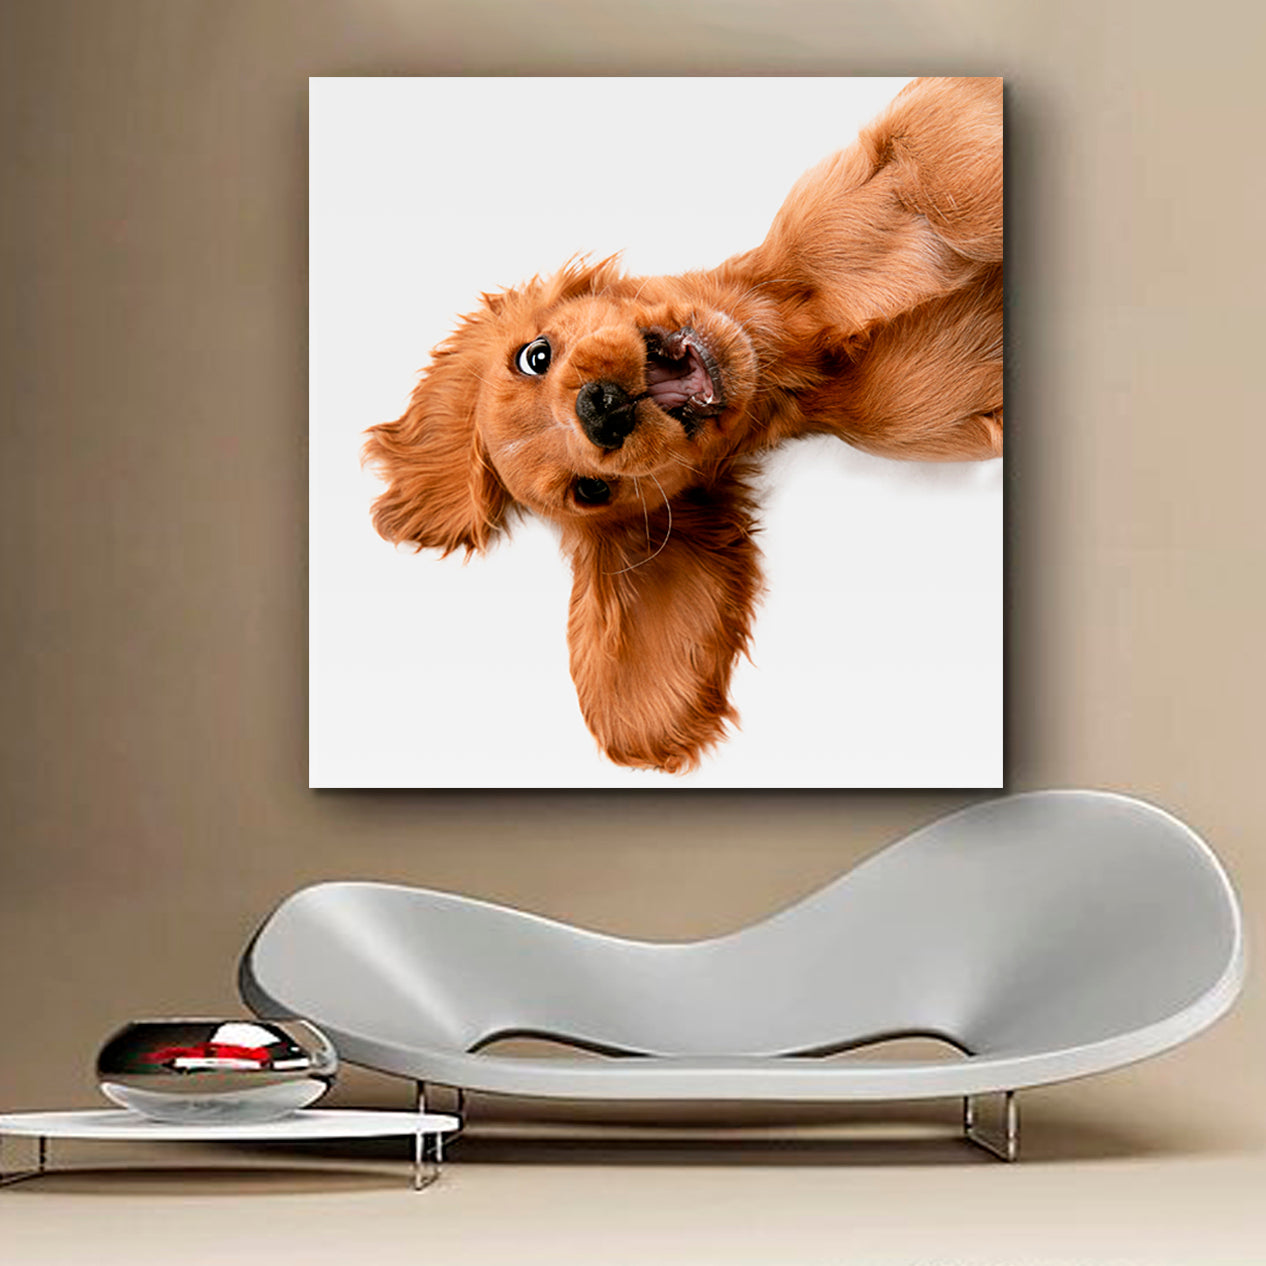 CRAZY PURE YOUTH English Cocker Spaniel Young Funny Cute Dog Kids Room Art - Square Panel Animals Canvas Print Artesty   